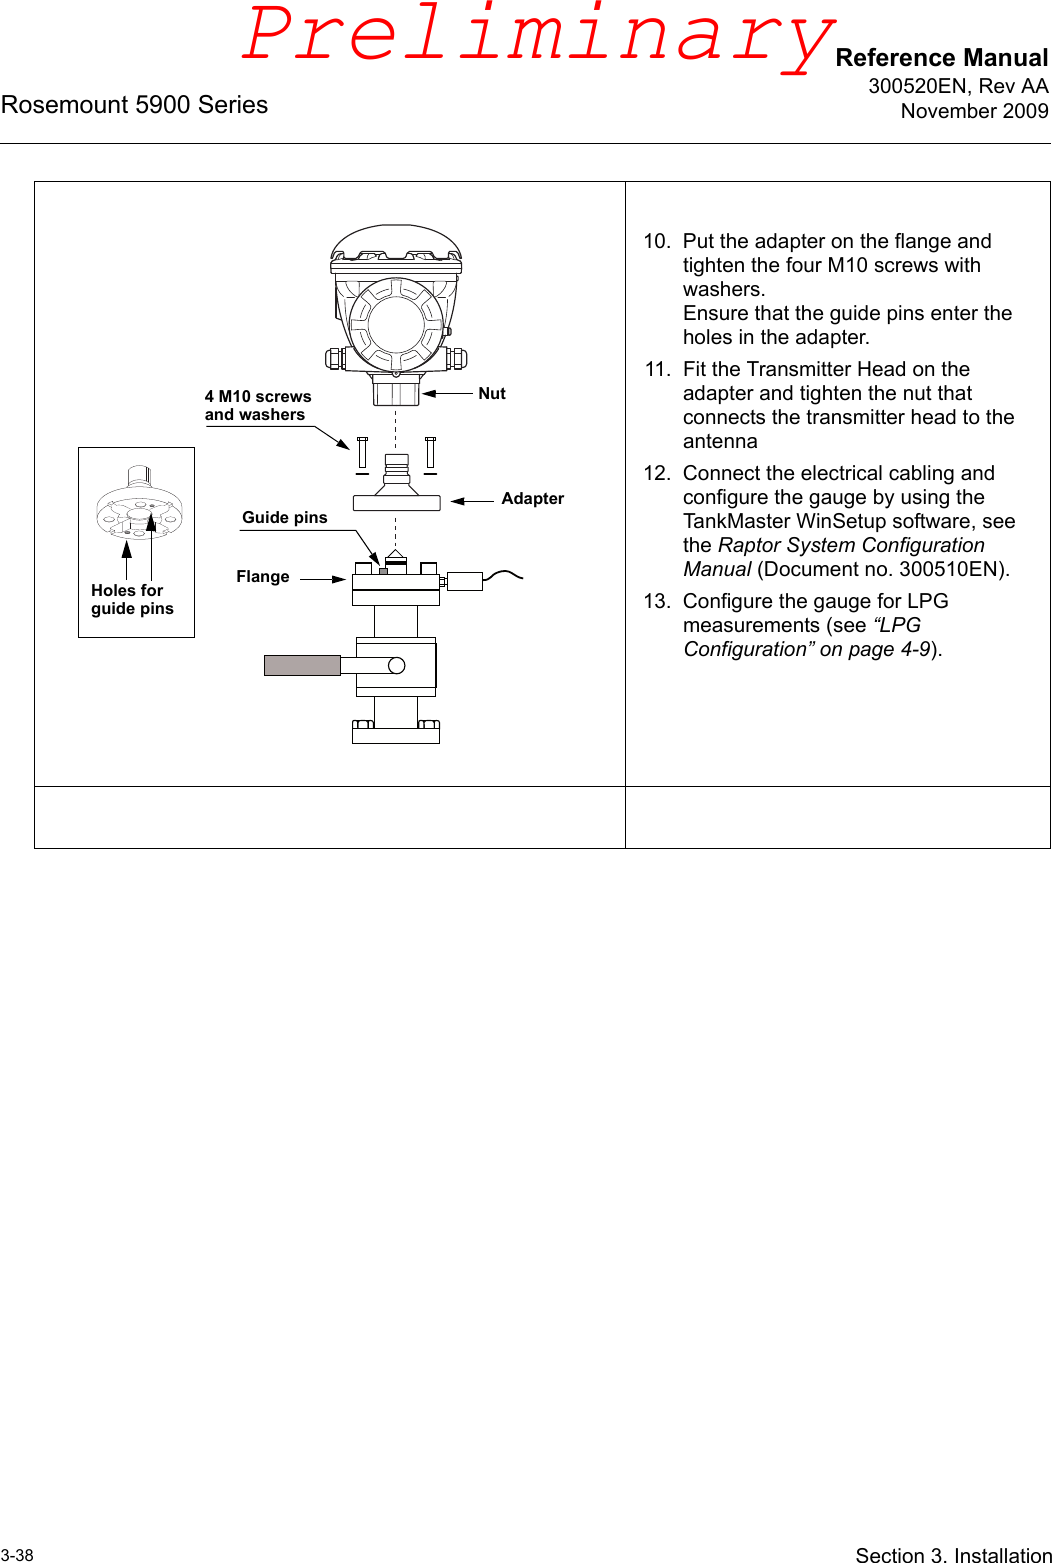 Reference Manual300520EN, Rev AANovember 2009Rosemount 5900 Series3-38 Section 3. Installation10. Put the adapter on the flange and tighten the four M10 screws with washers. Ensure that the guide pins enter the holes in the adapter.11. Fit the Transmitter Head on the adapter and tighten the nut that connects the transmitter head to the antenna12. Connect the electrical cabling and configure the gauge by using the TankMaster WinSetup software, see the Raptor System Configuration Manual (Document no. 300510EN).13. Configure the gauge for LPG measurements (see “LPG Configuration” on page 4-9).4 M10 screws and washersGuide pinsFlangeAdapterNutHoles for guide pinsPreliminary